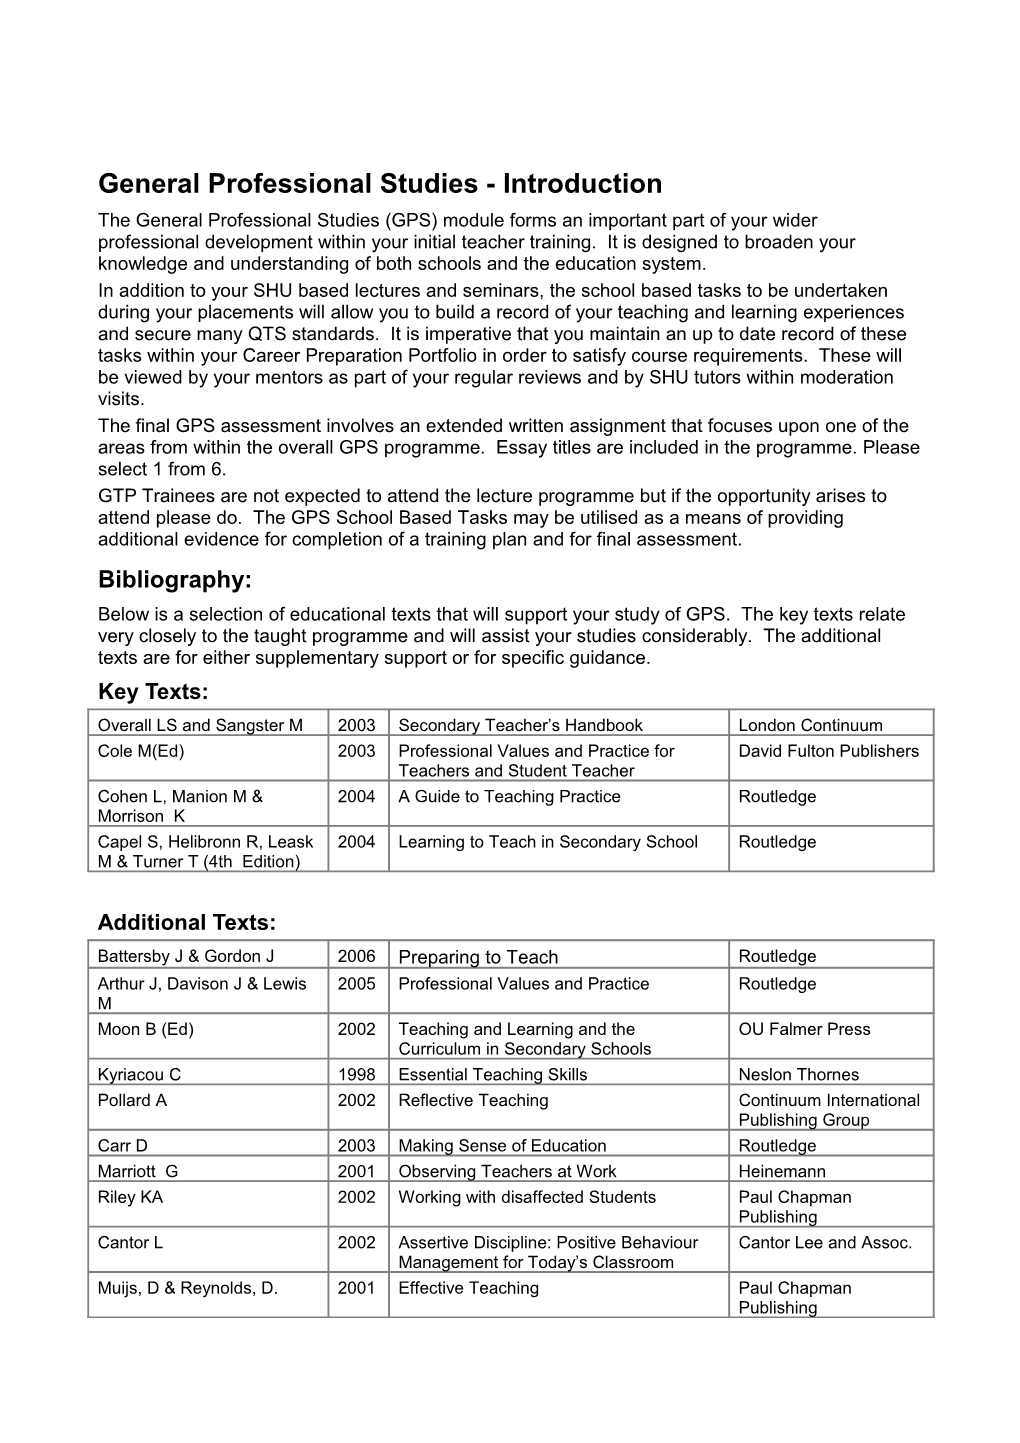 Guidance Notes for the Use of the Student Profile